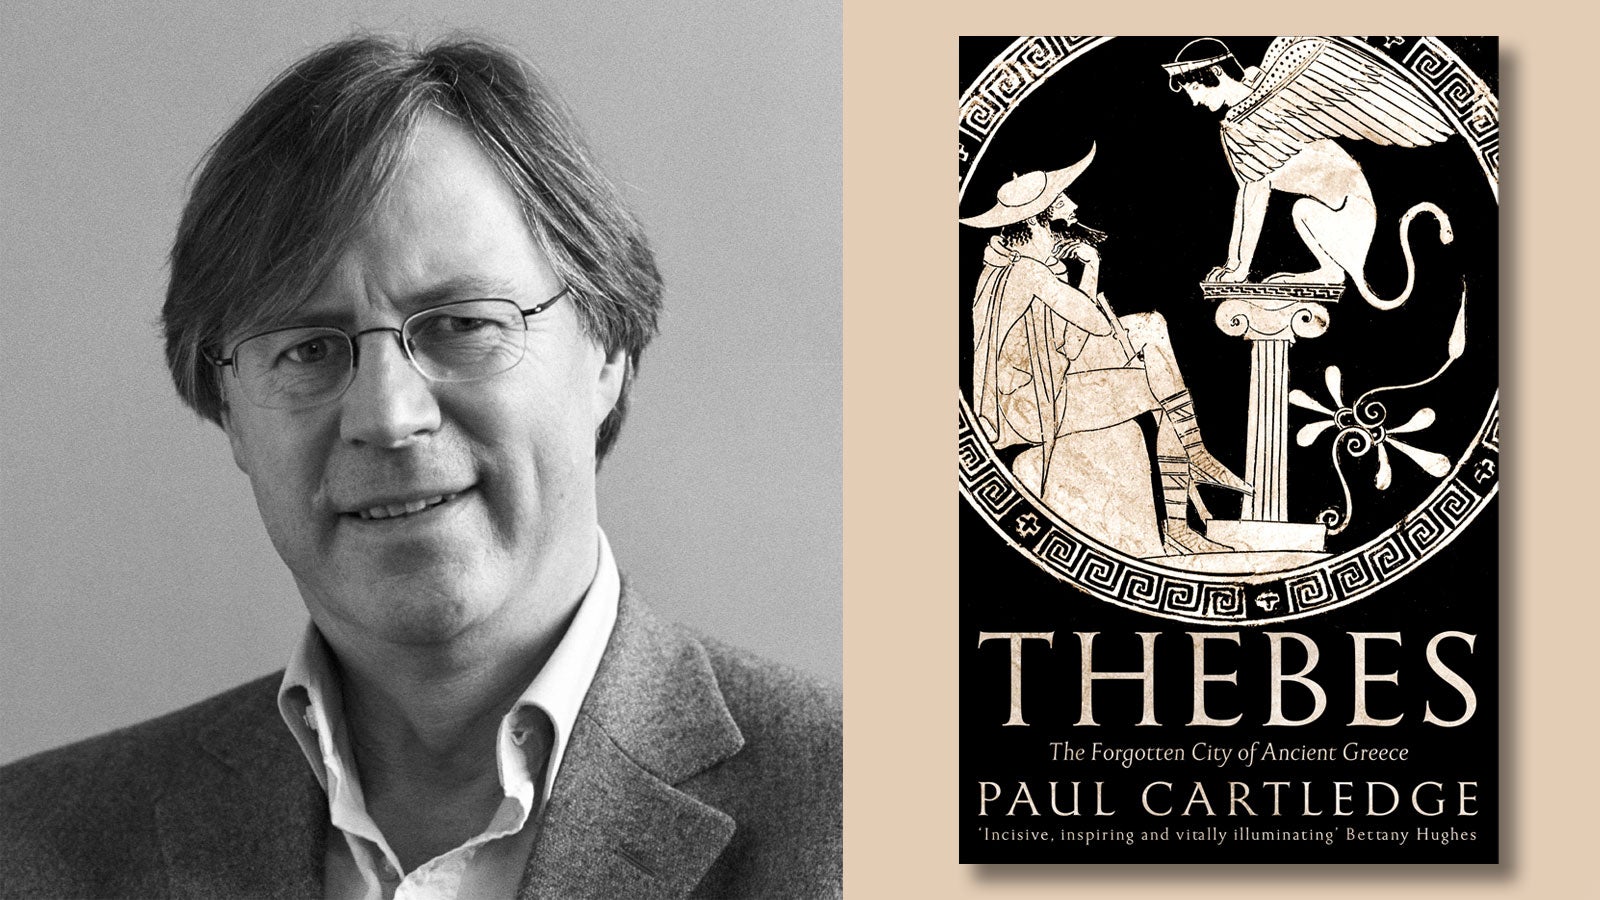 Paul Cartledge and the Thebes book cover